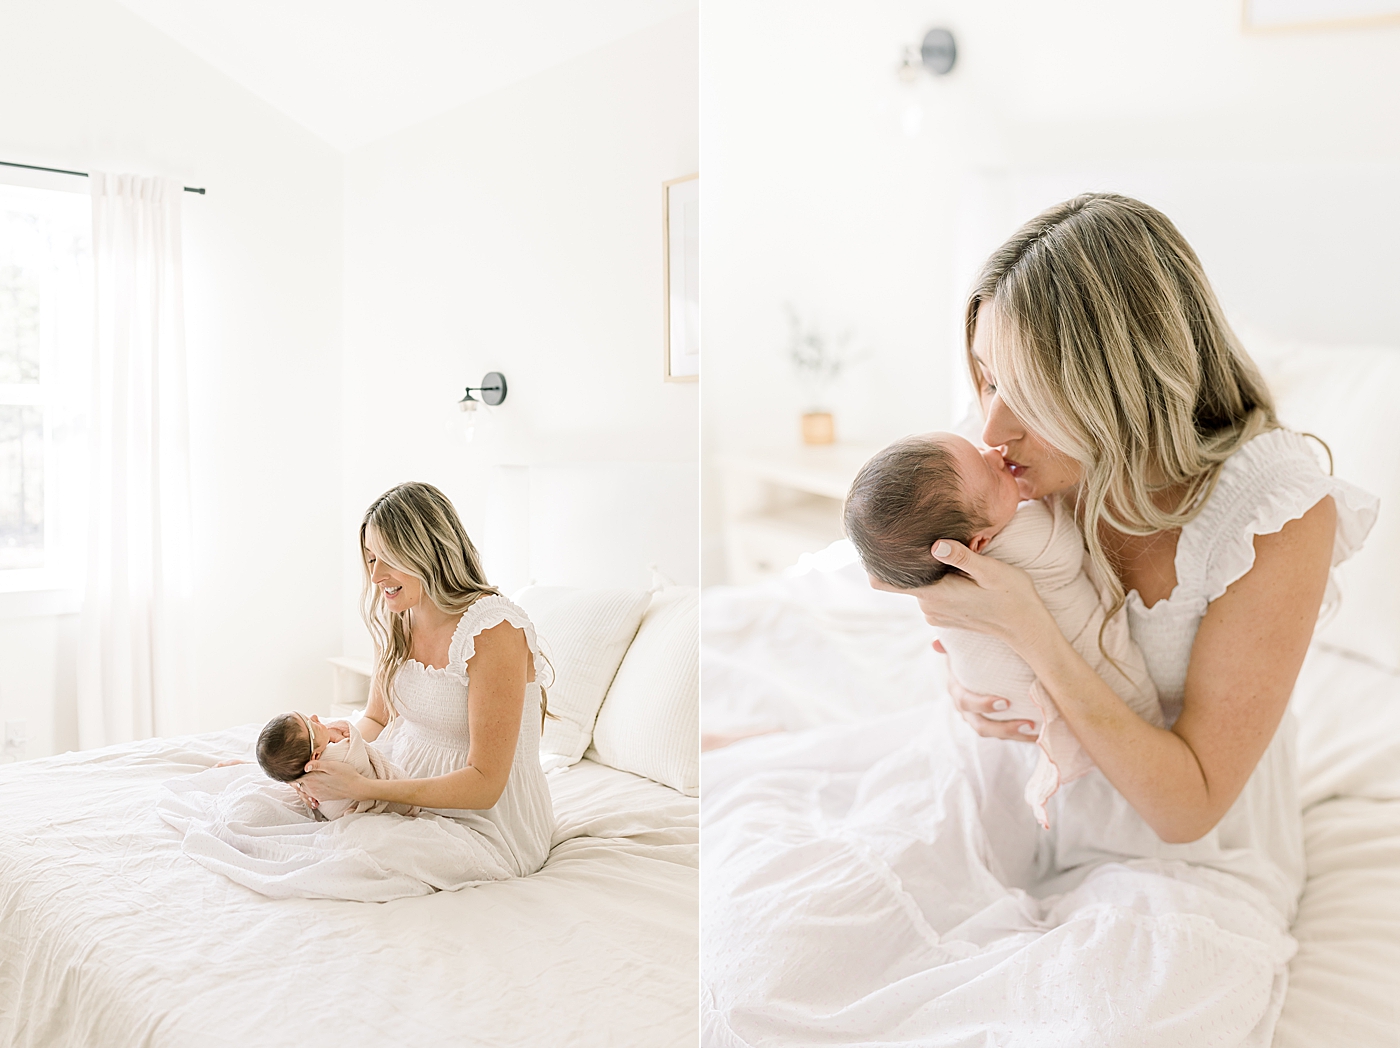 Mom sitting on her white bed with her newborn baby girl | Image by Caitlyn Motycka